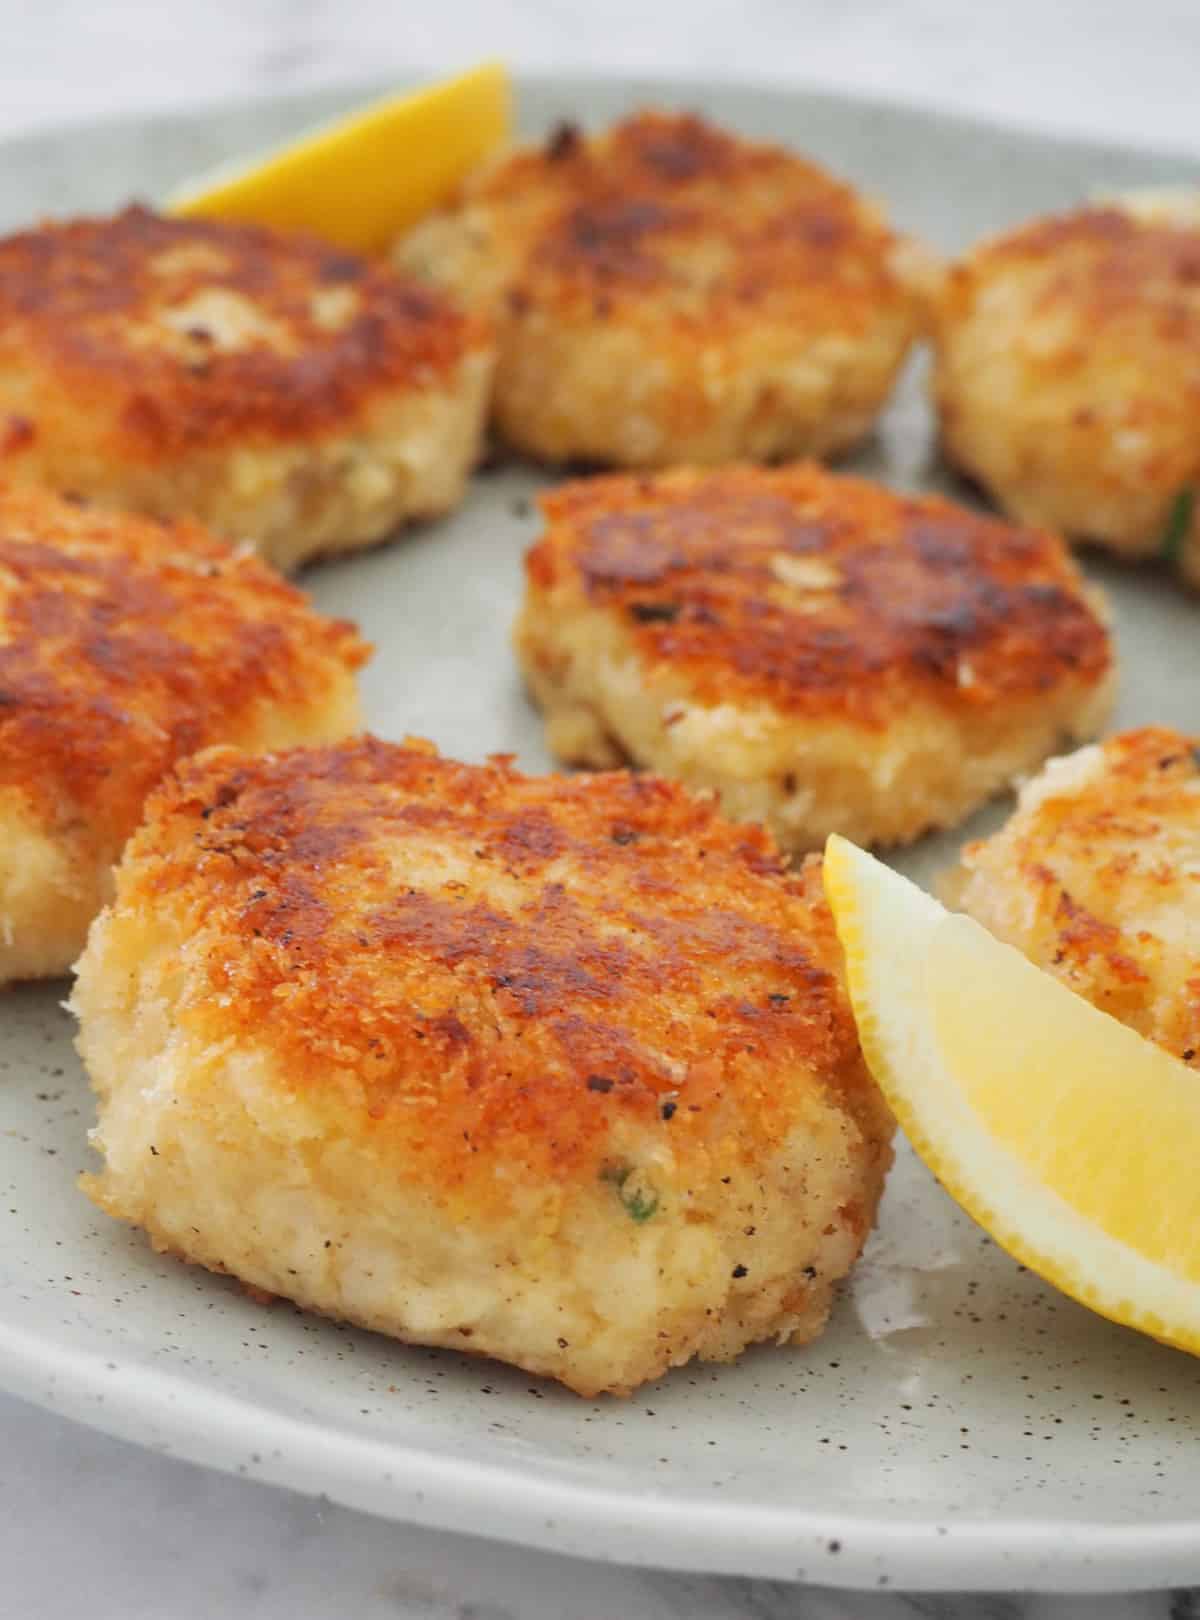 Plate of Fish Cakes with lemon wedges.